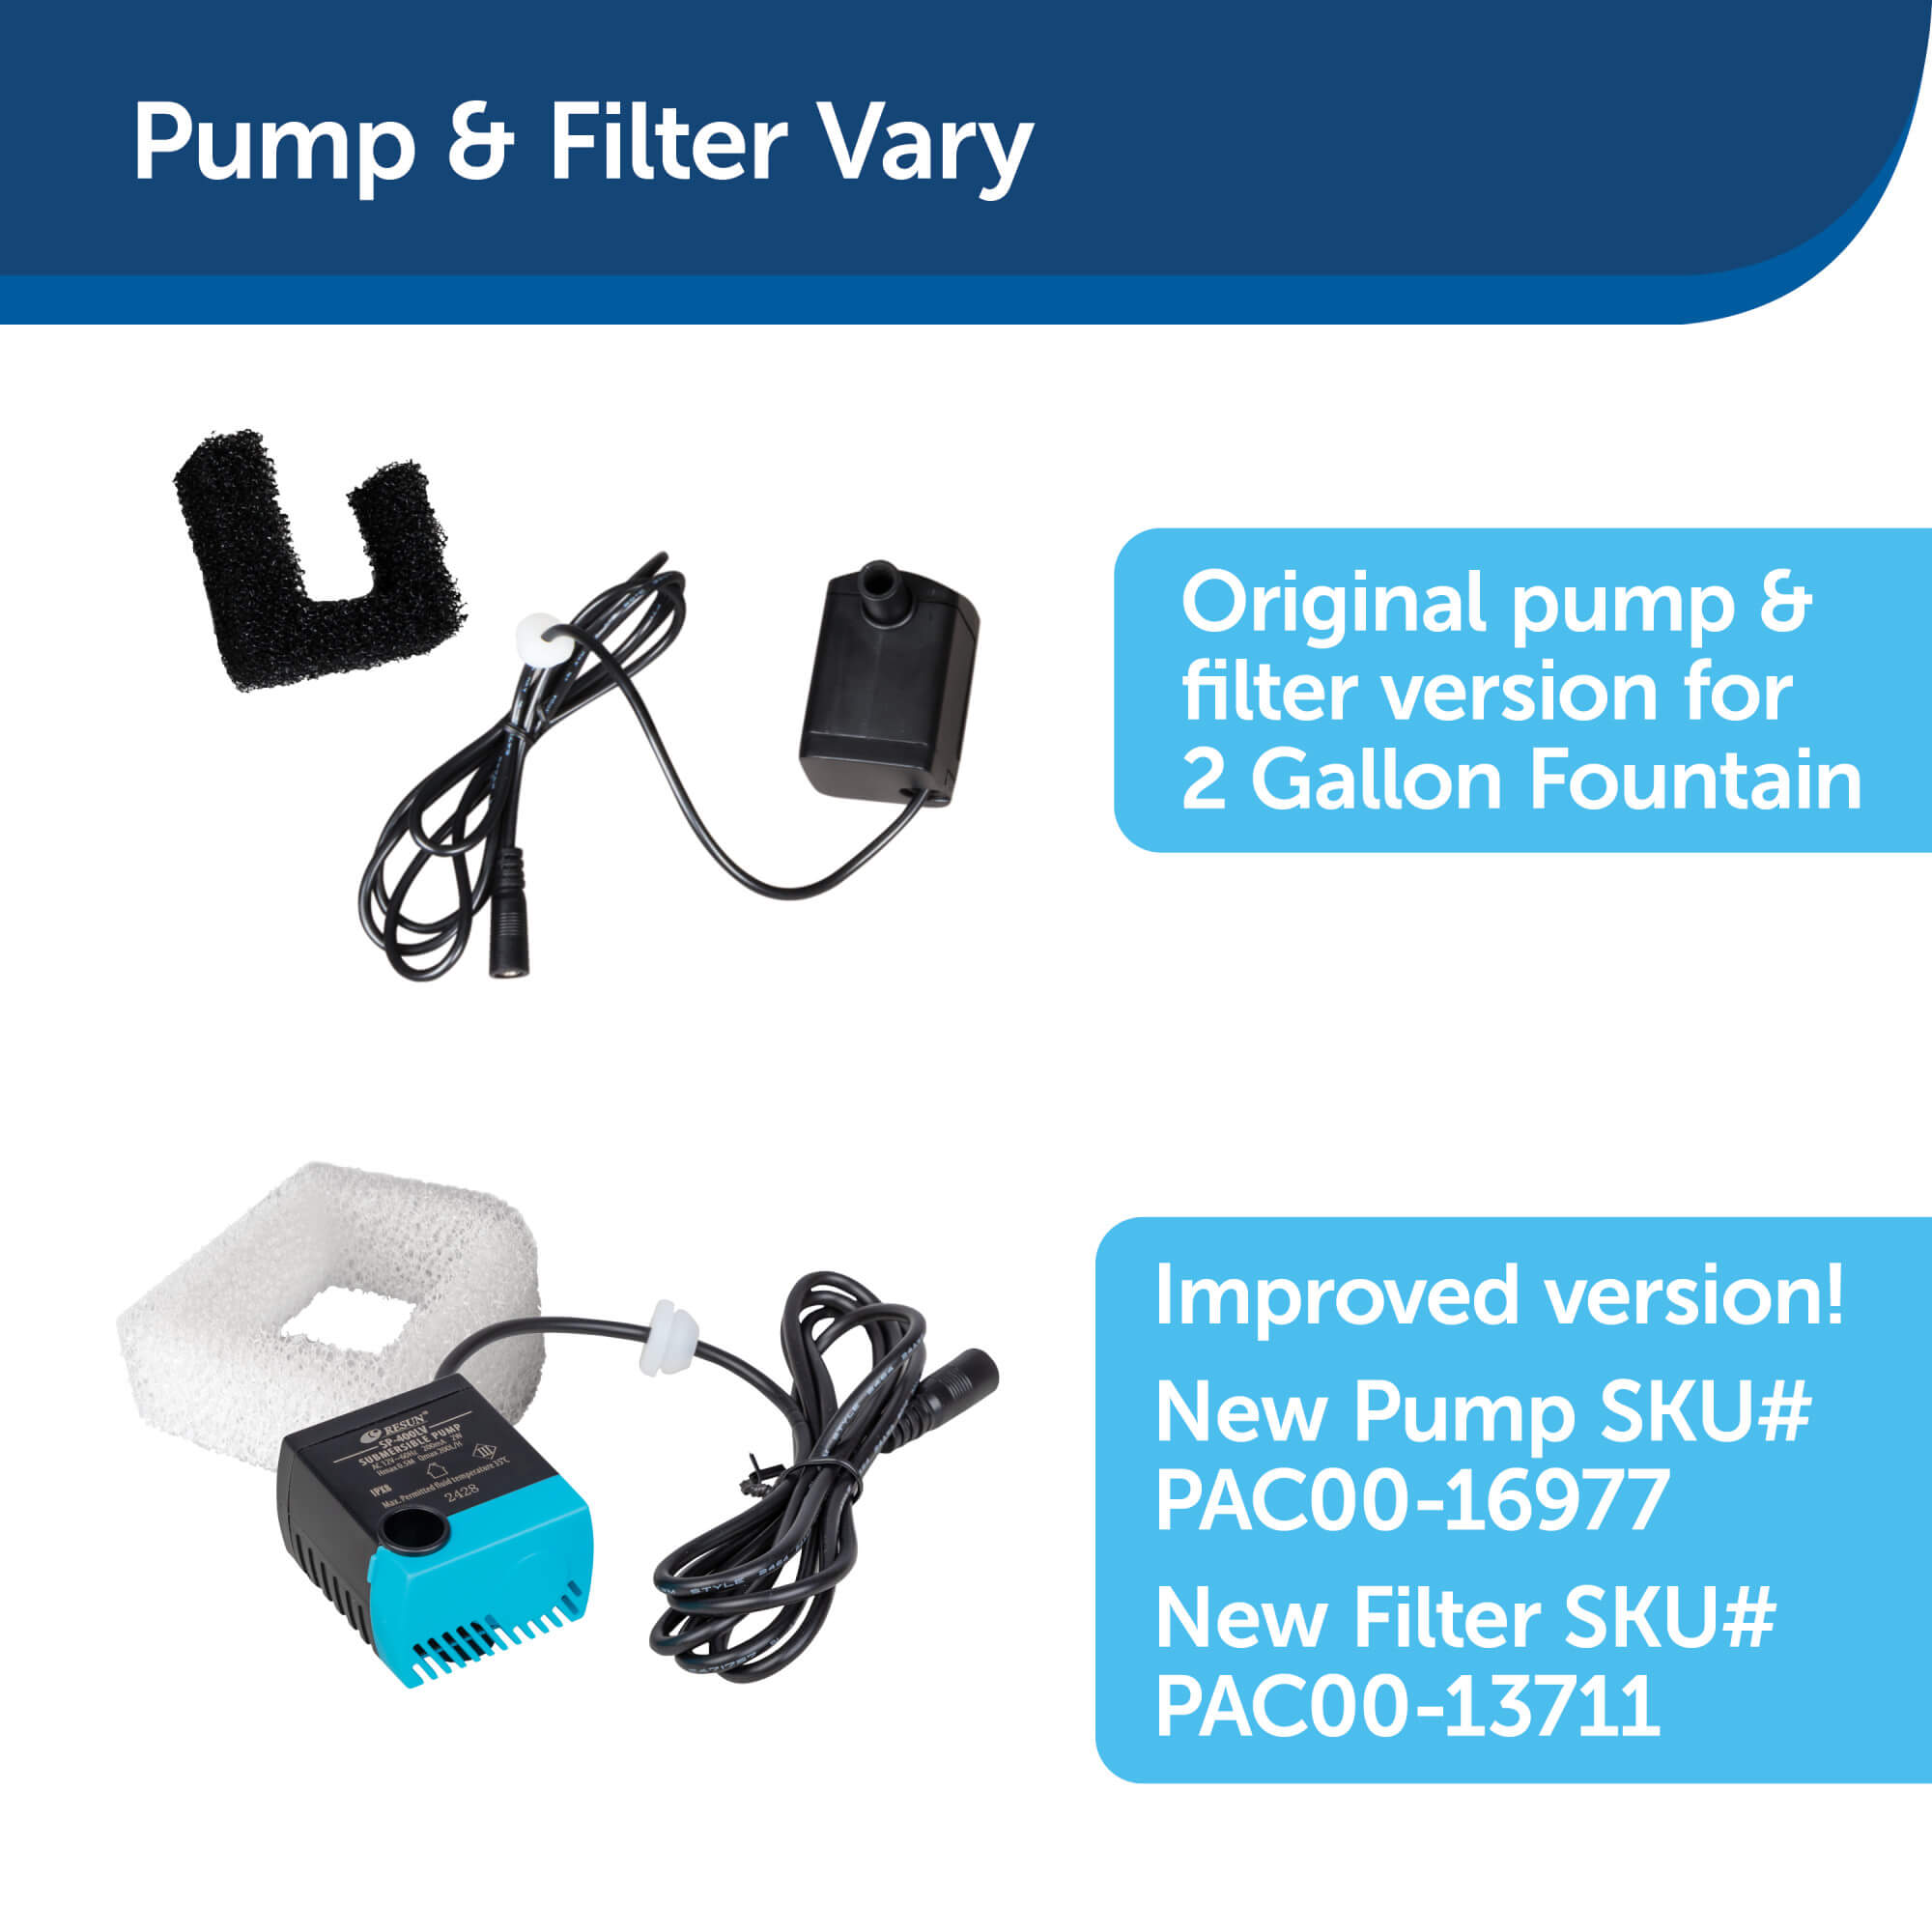 Pump and filter vary